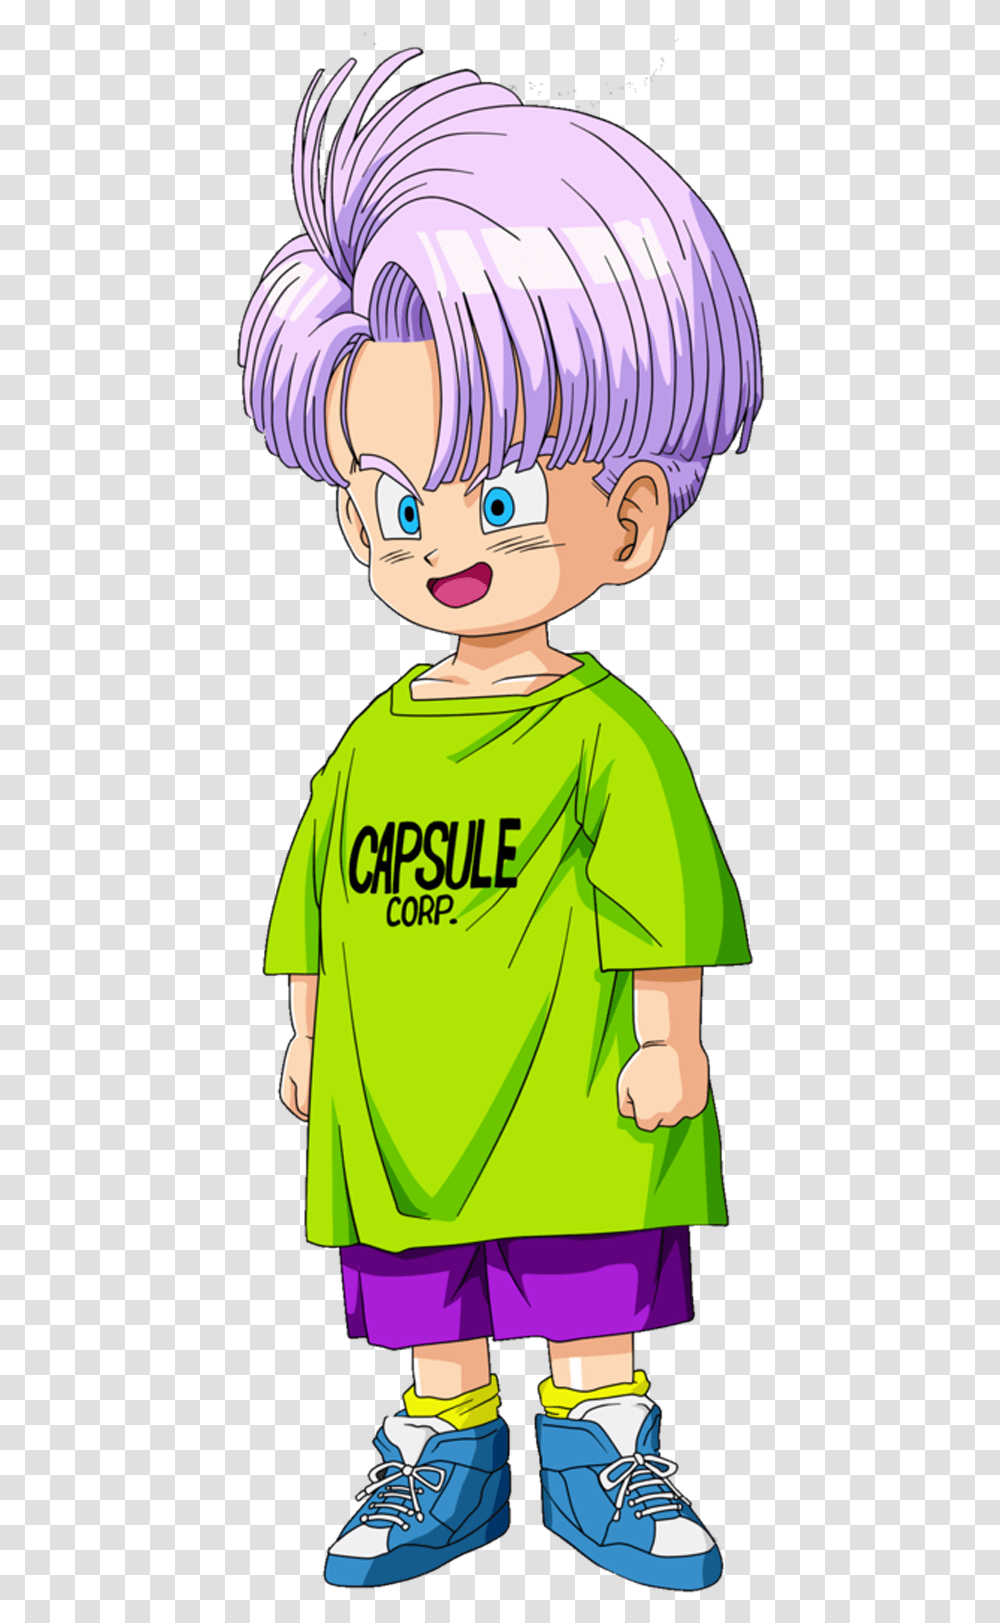 Download Share This Image Dragon Ball Z Trunks Image Kid Trunks Icon, Clothing, Apparel, Person, Human Transparent Png